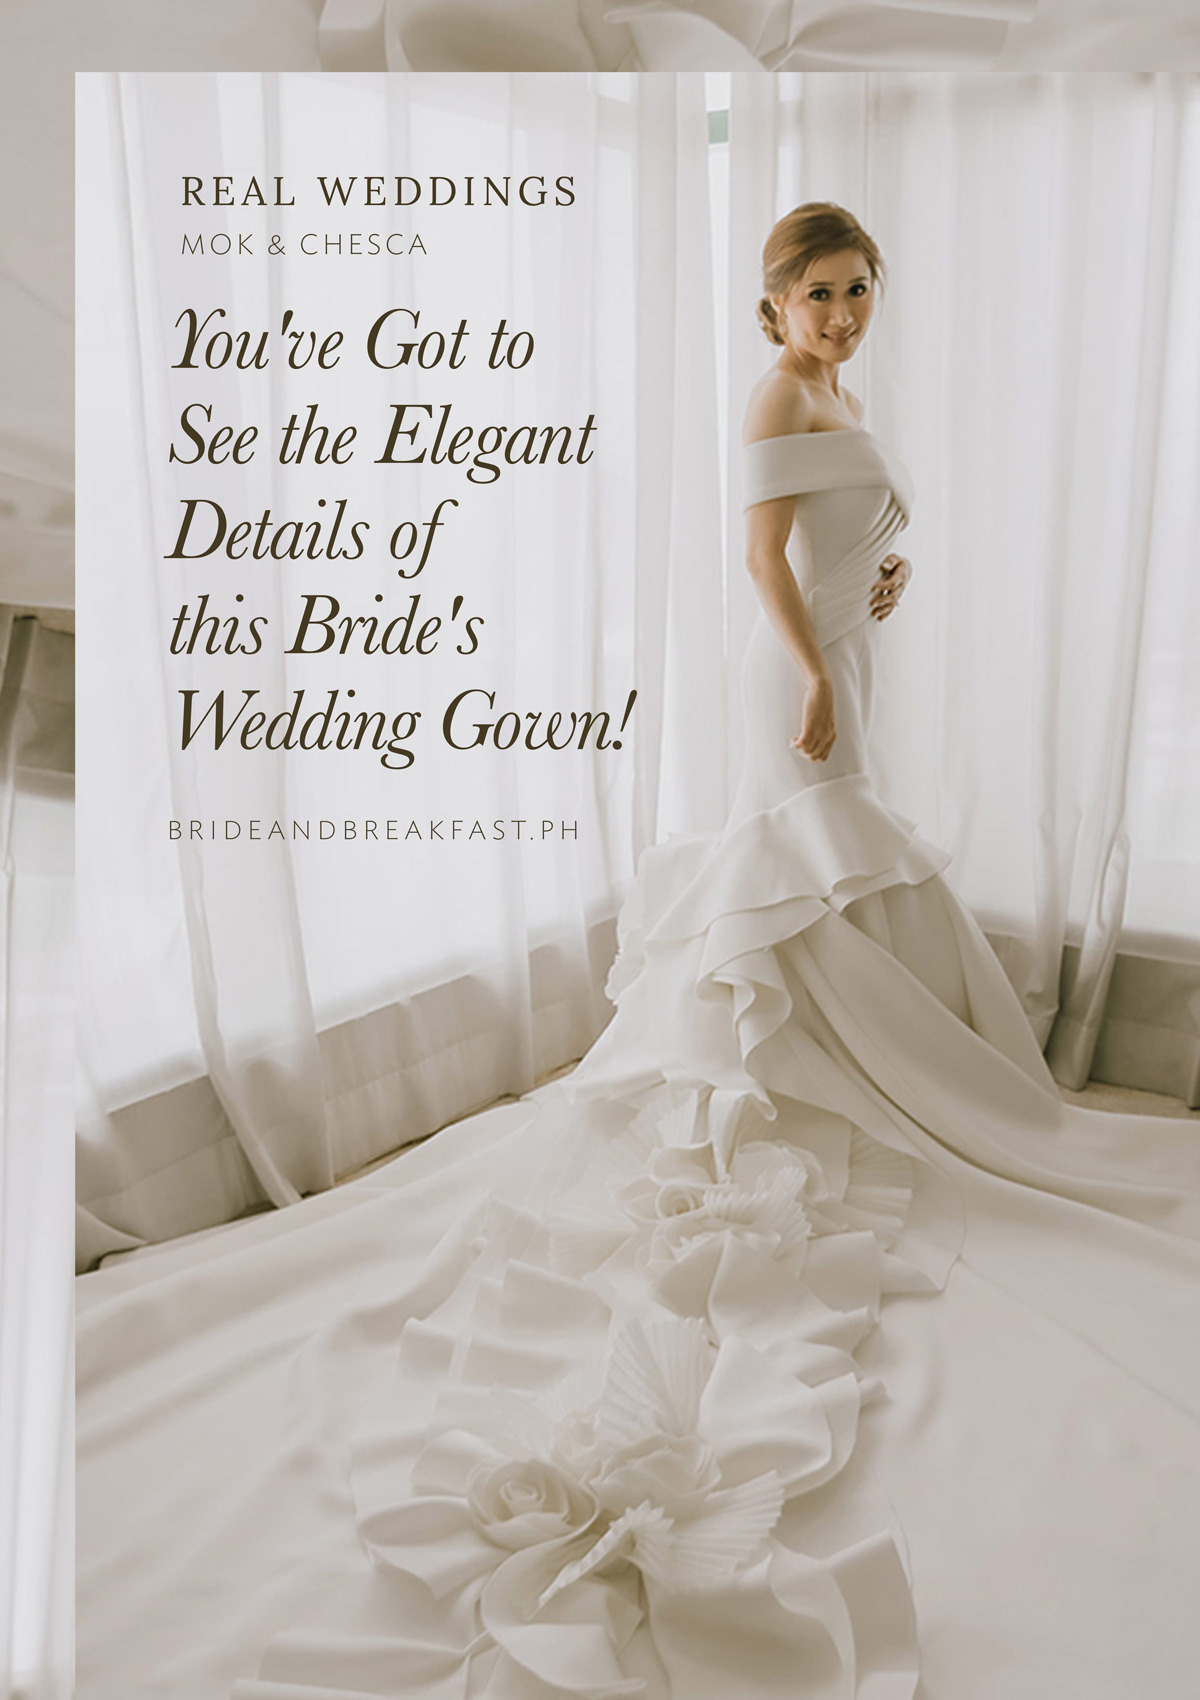 You've got to see the elegant details of this bride's wedding gown!